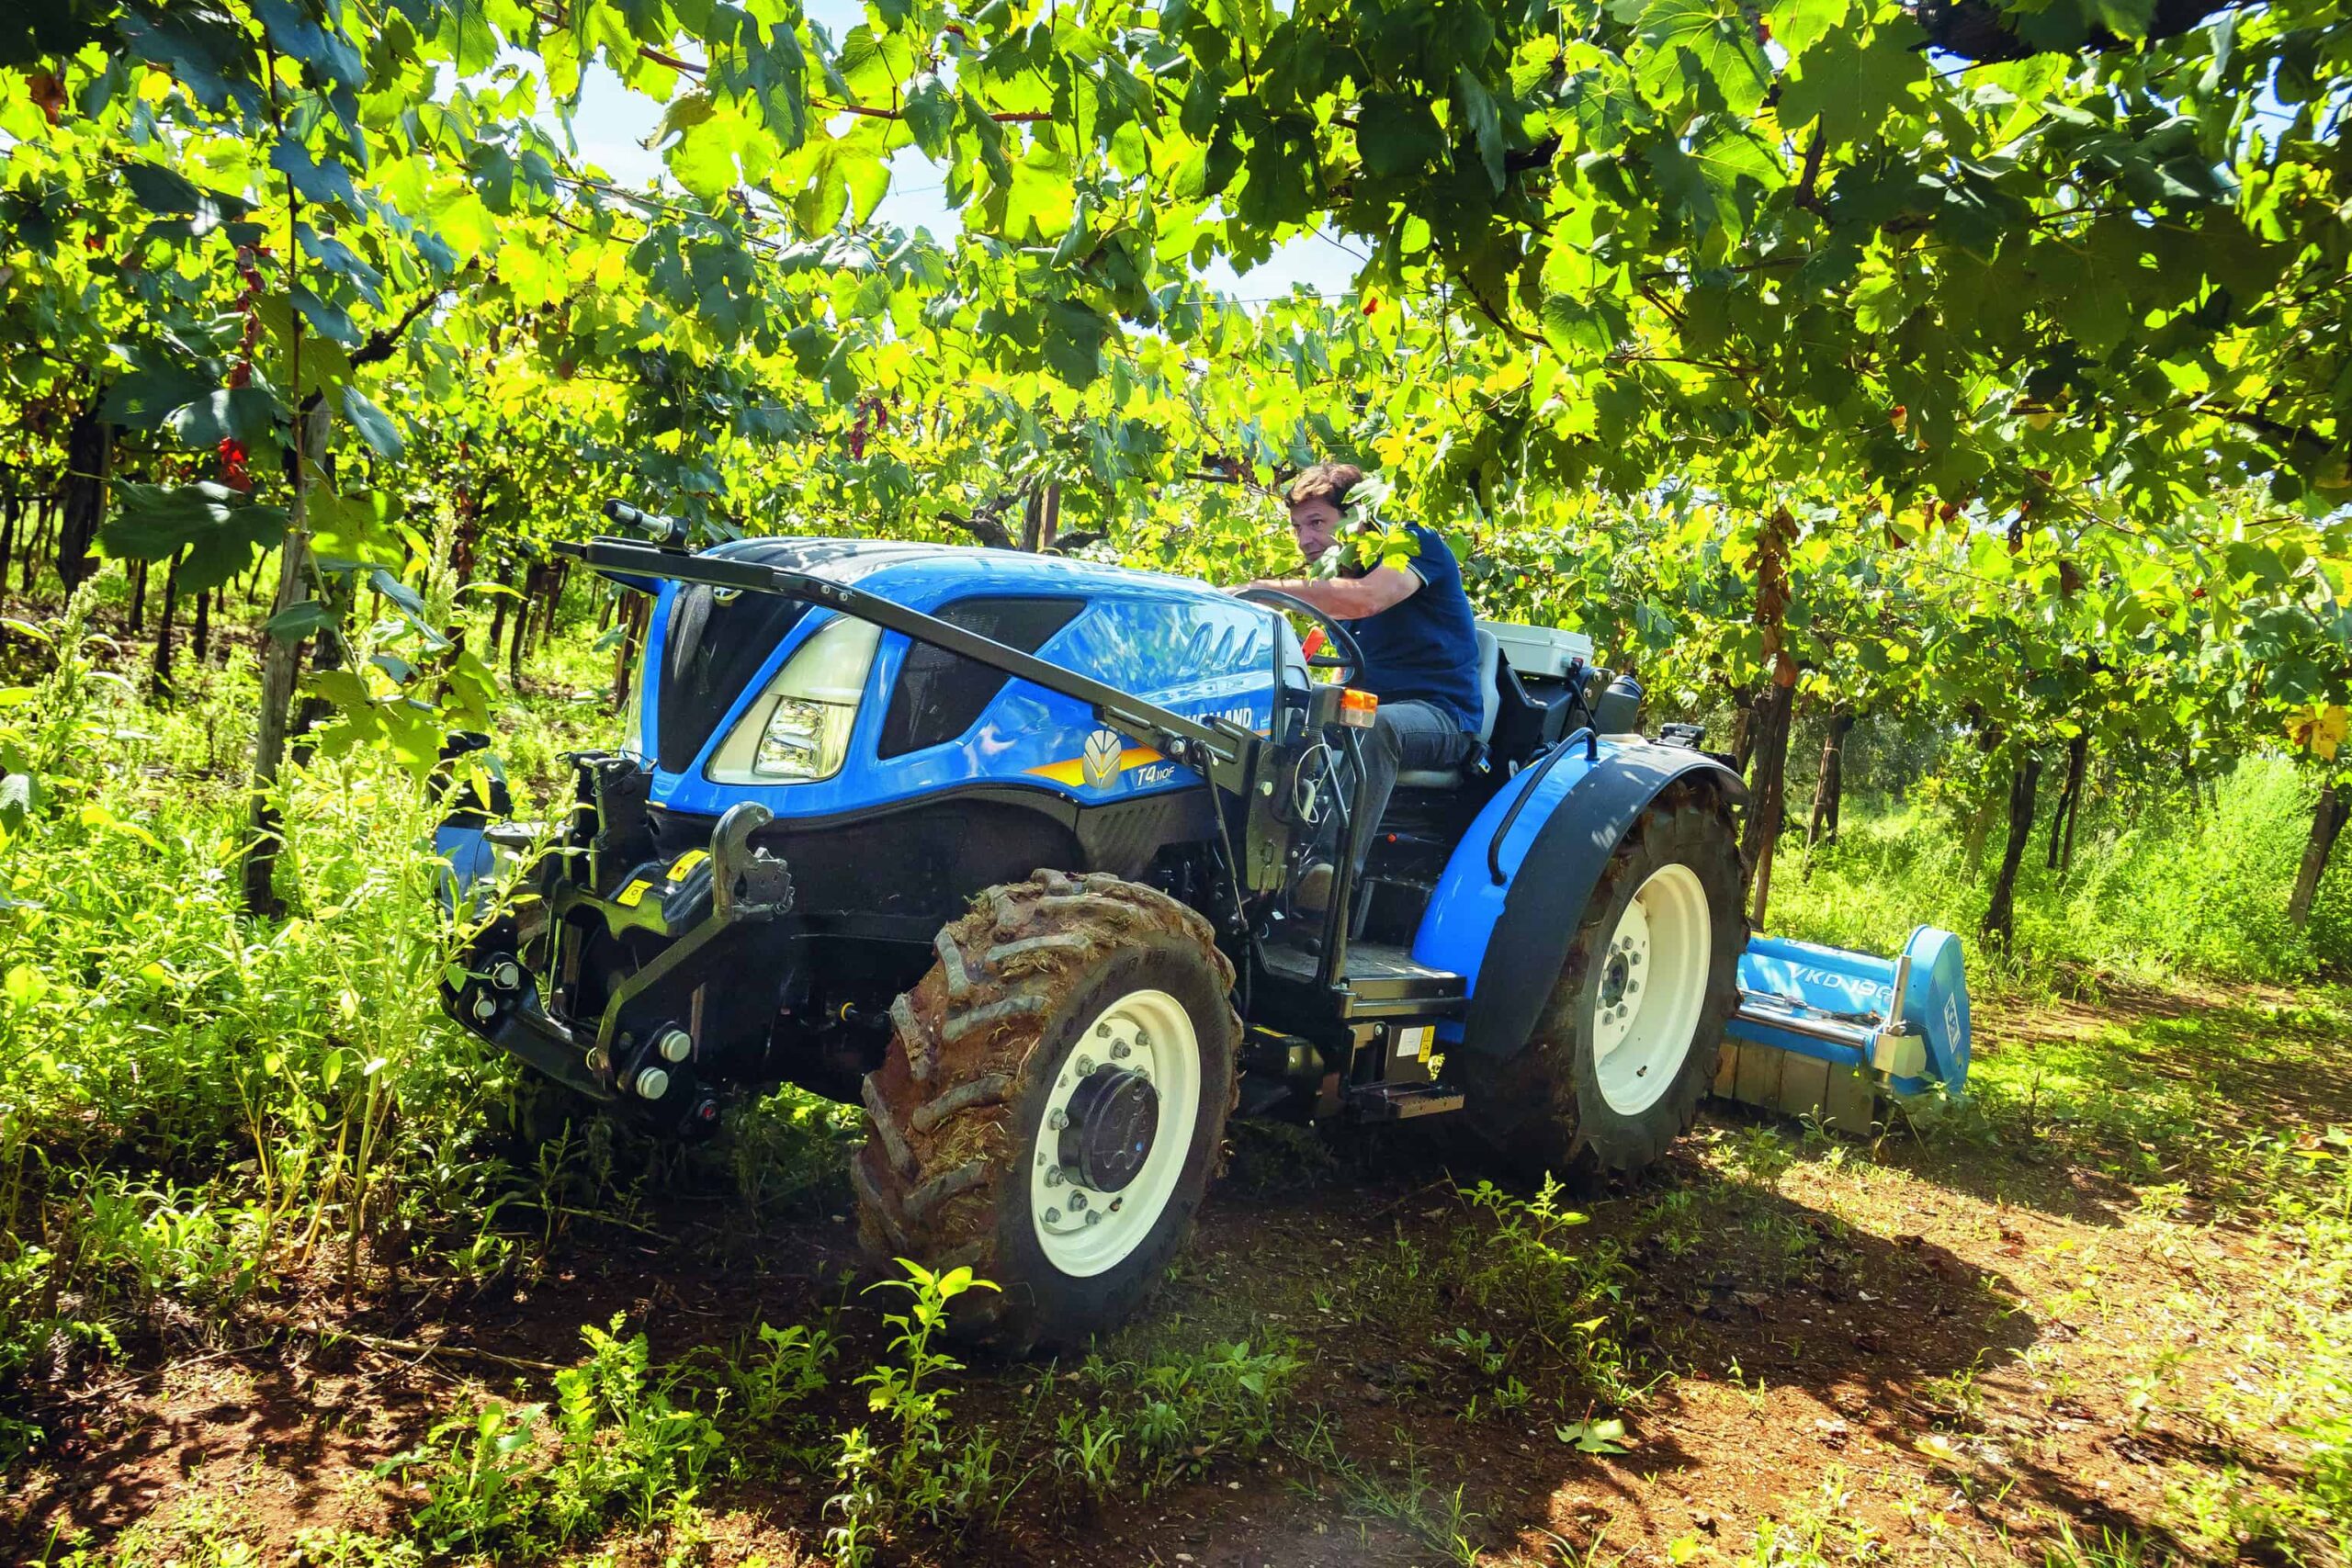 New Holland updates and extends its market-leading speciality tractor offering